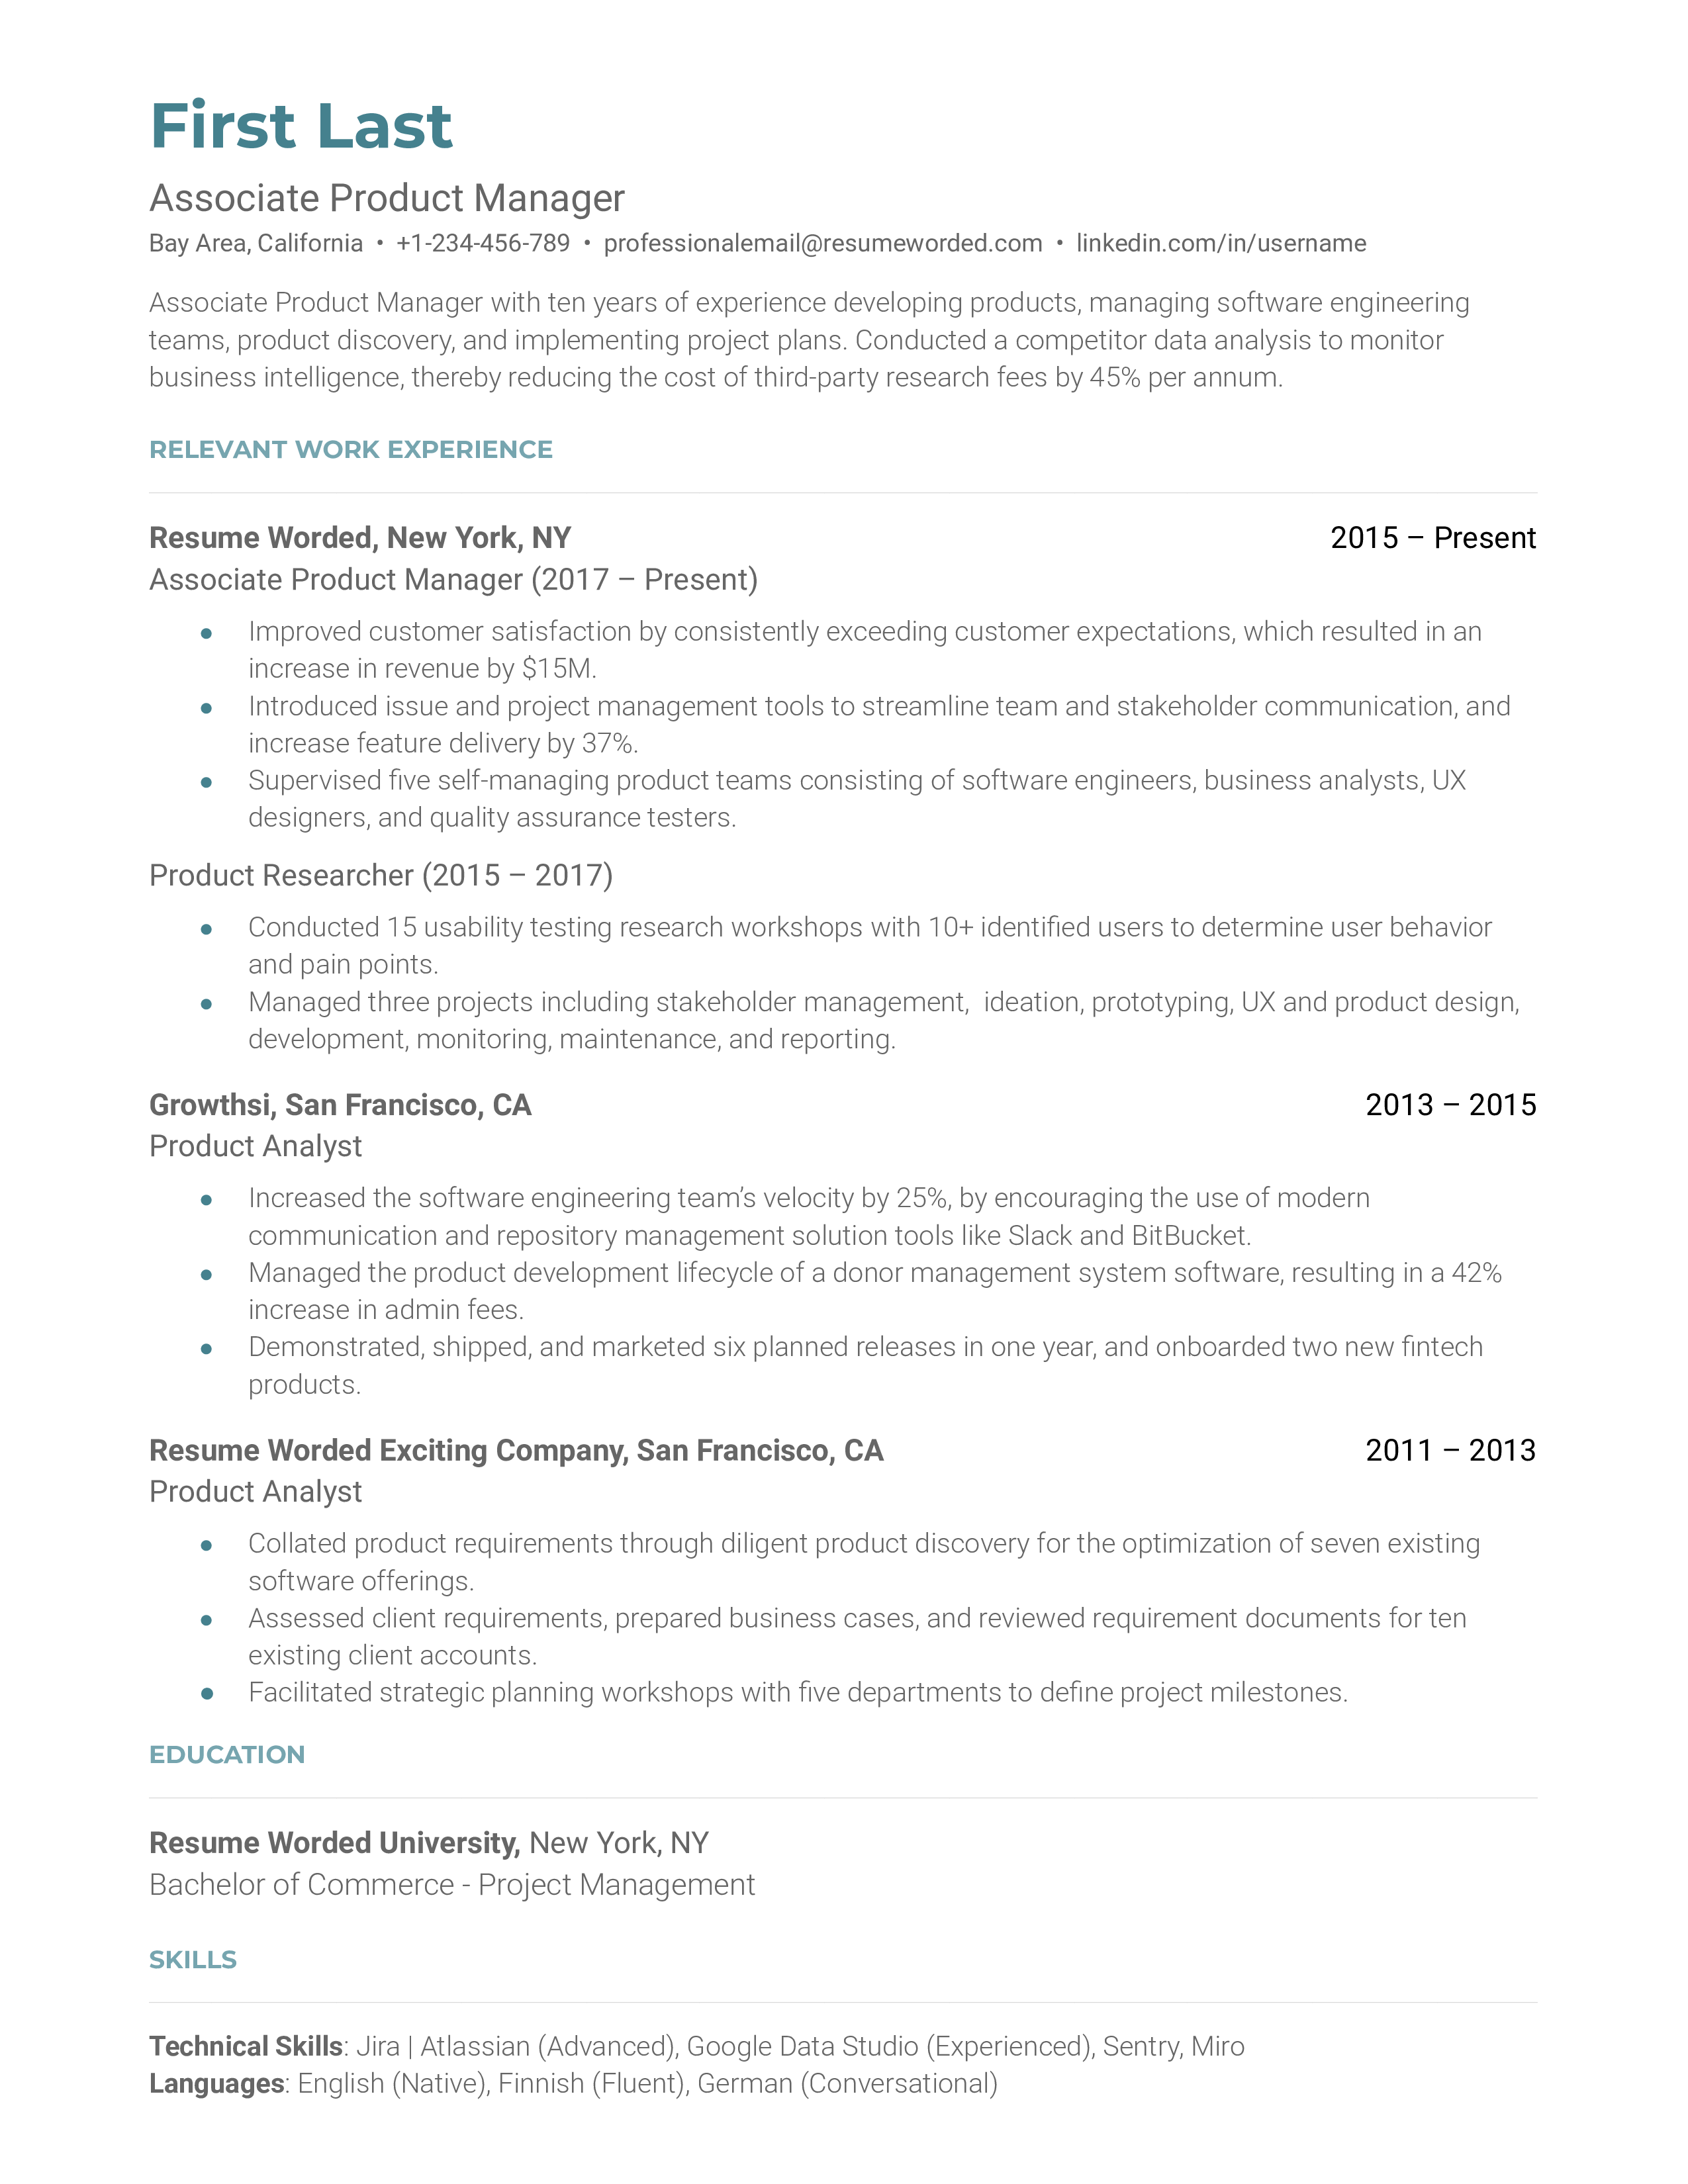 Associate product manager resume sample that highlights the applicant’s career progression and analyst background.